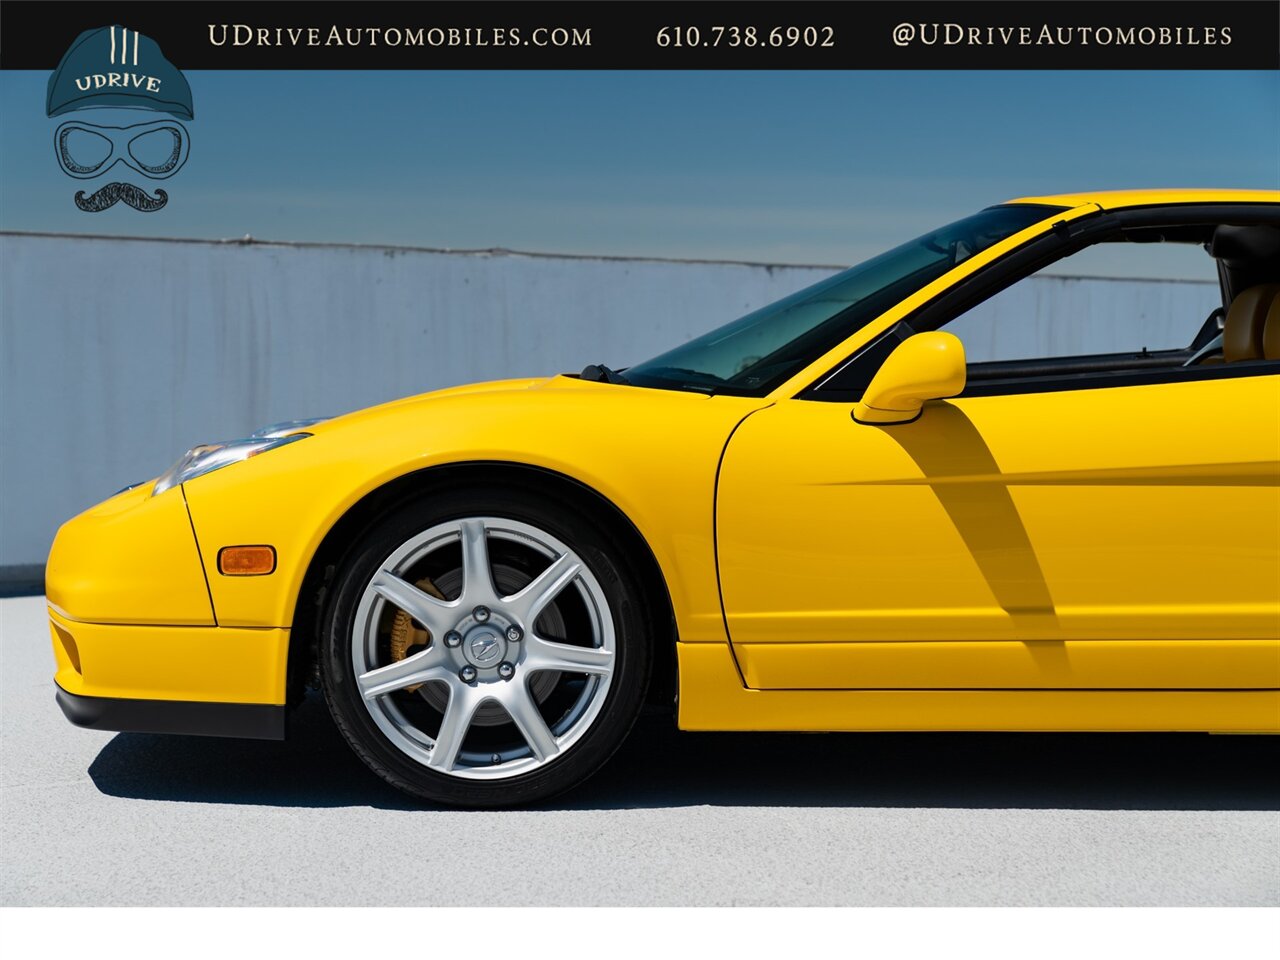 2003 Acura NSX NSX-T  Spa Yellow over Yellow Lthr 1 of 13 Produced - Photo 10 - West Chester, PA 19382